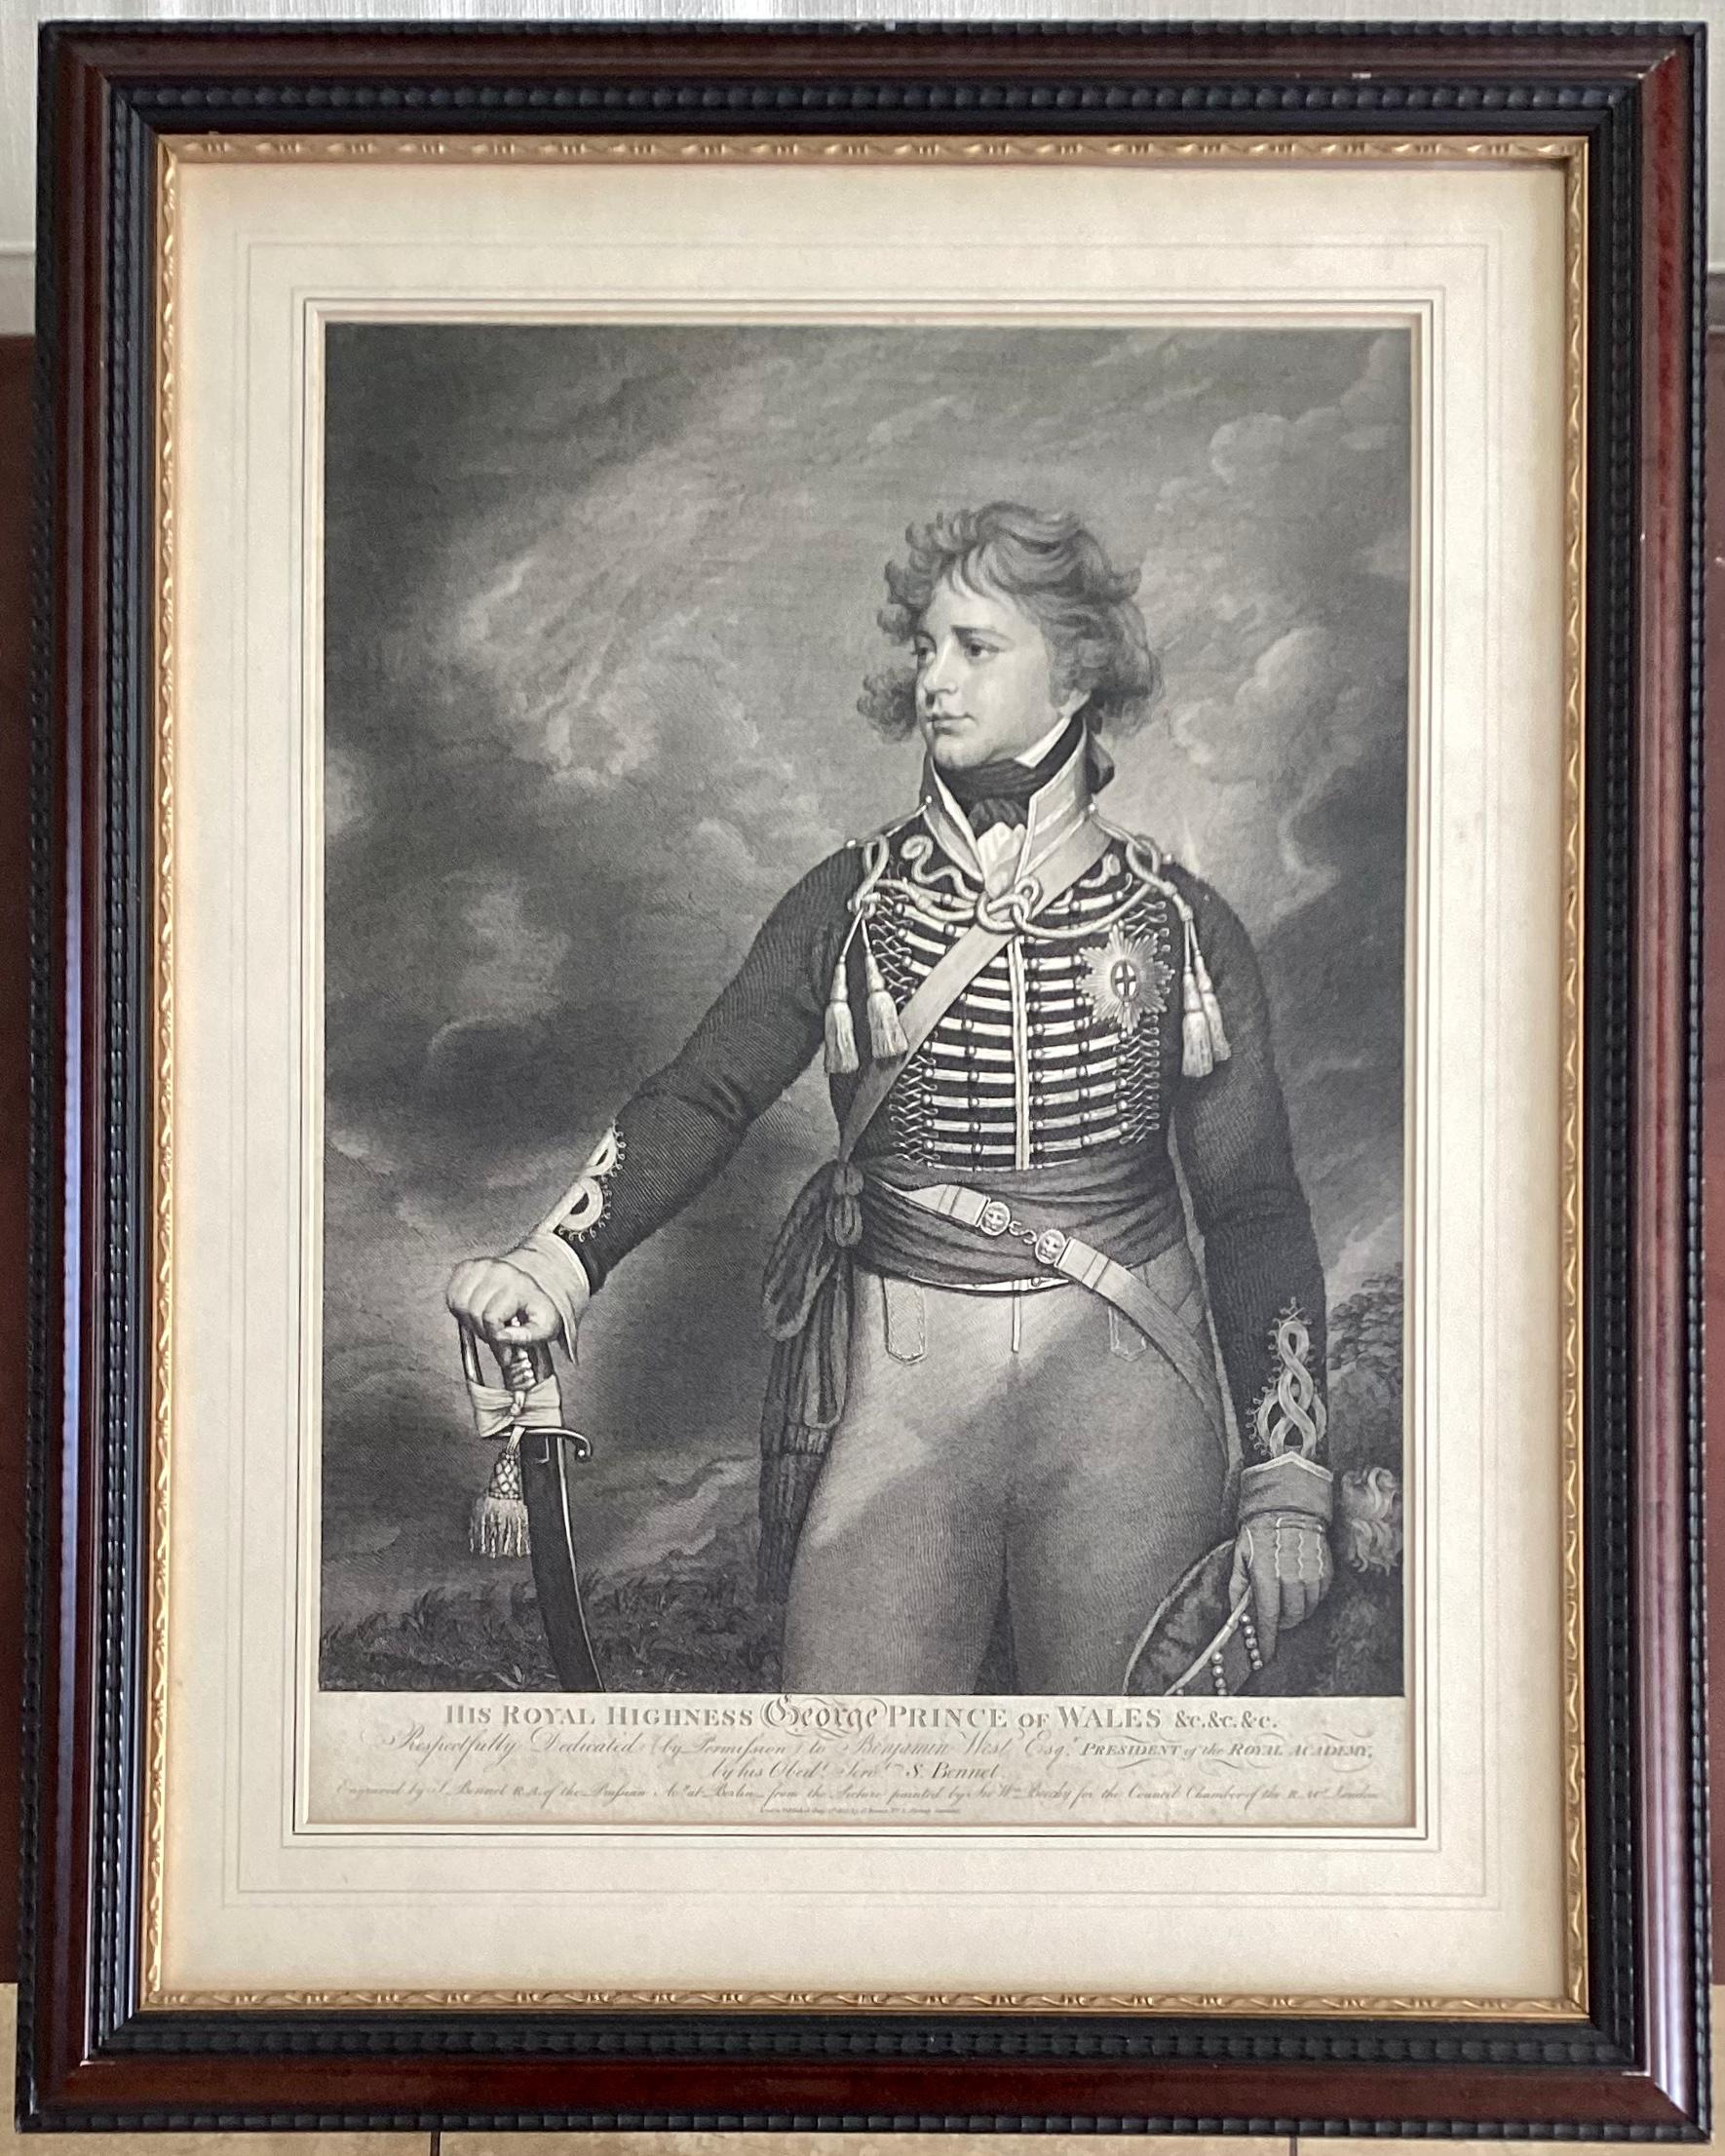 Classic framed lithograph of a young Prince George of Wales portrait. This item is in its original frame. Great addition to your classic inspired interiors.